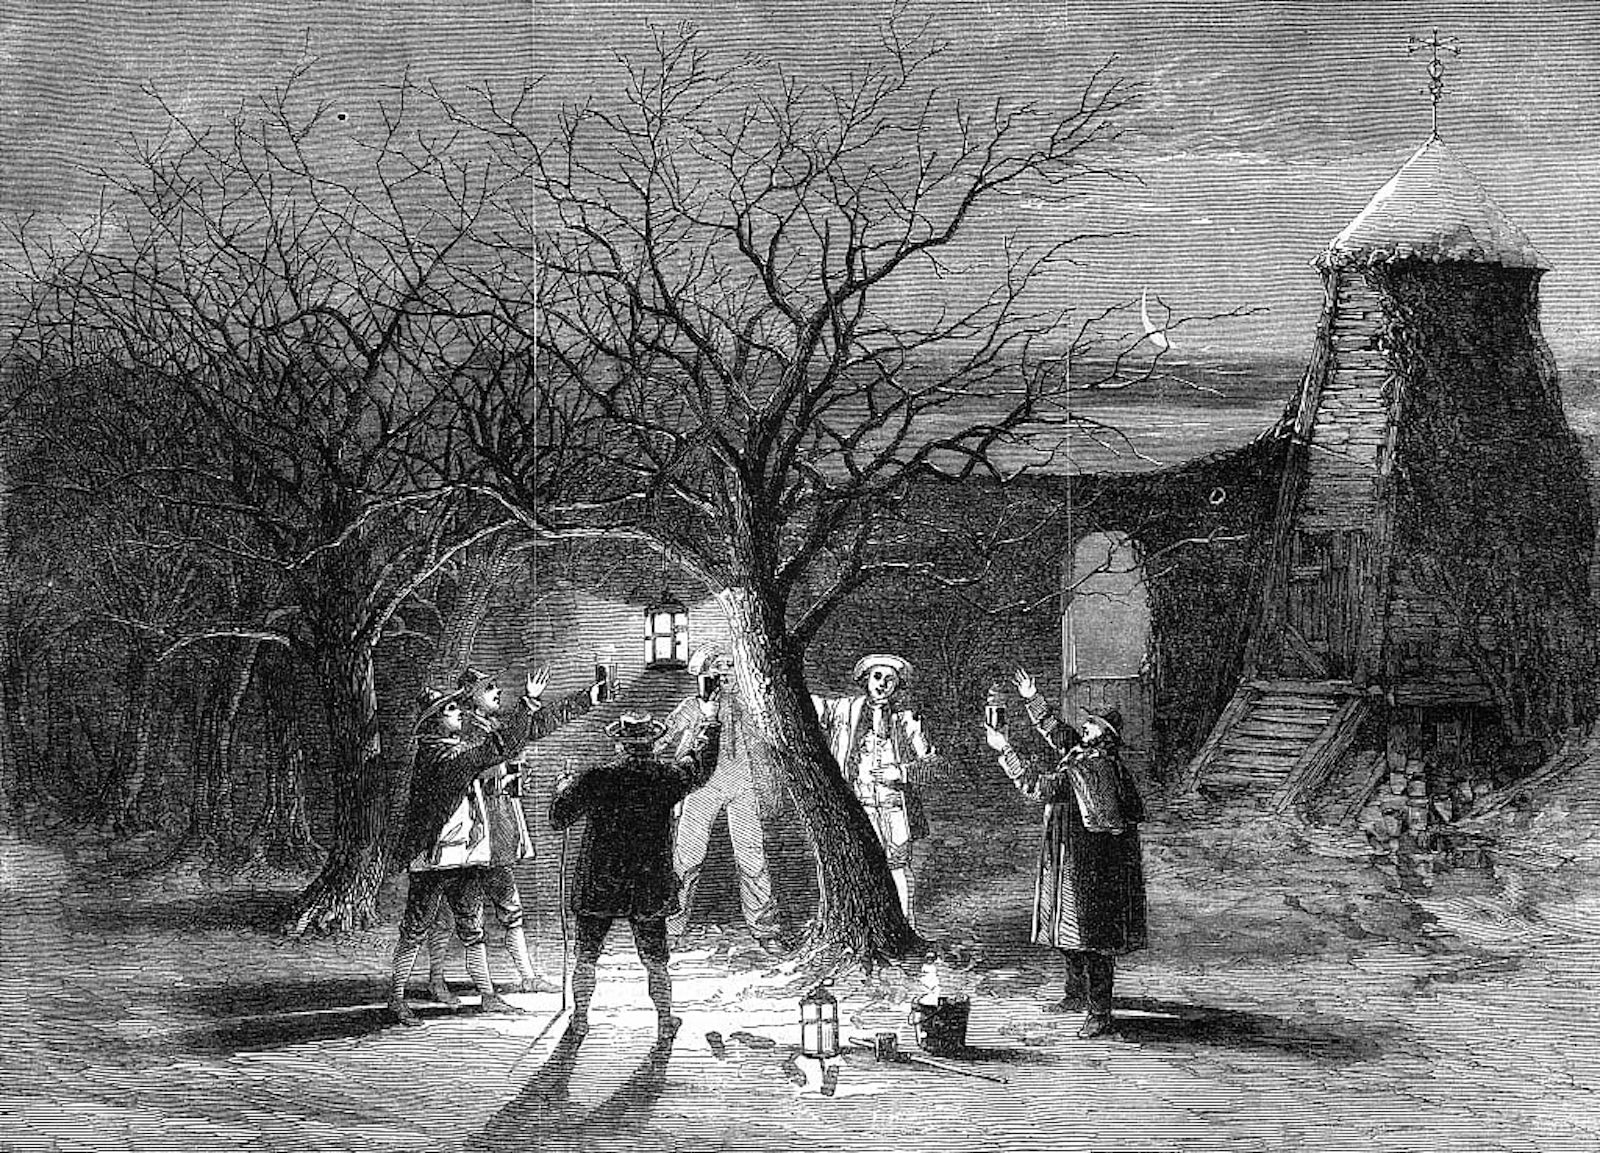 Wassailing apple trees with hot cider on Twelfth Eve, 1861. Chronicle/Alamy Stock Photo.